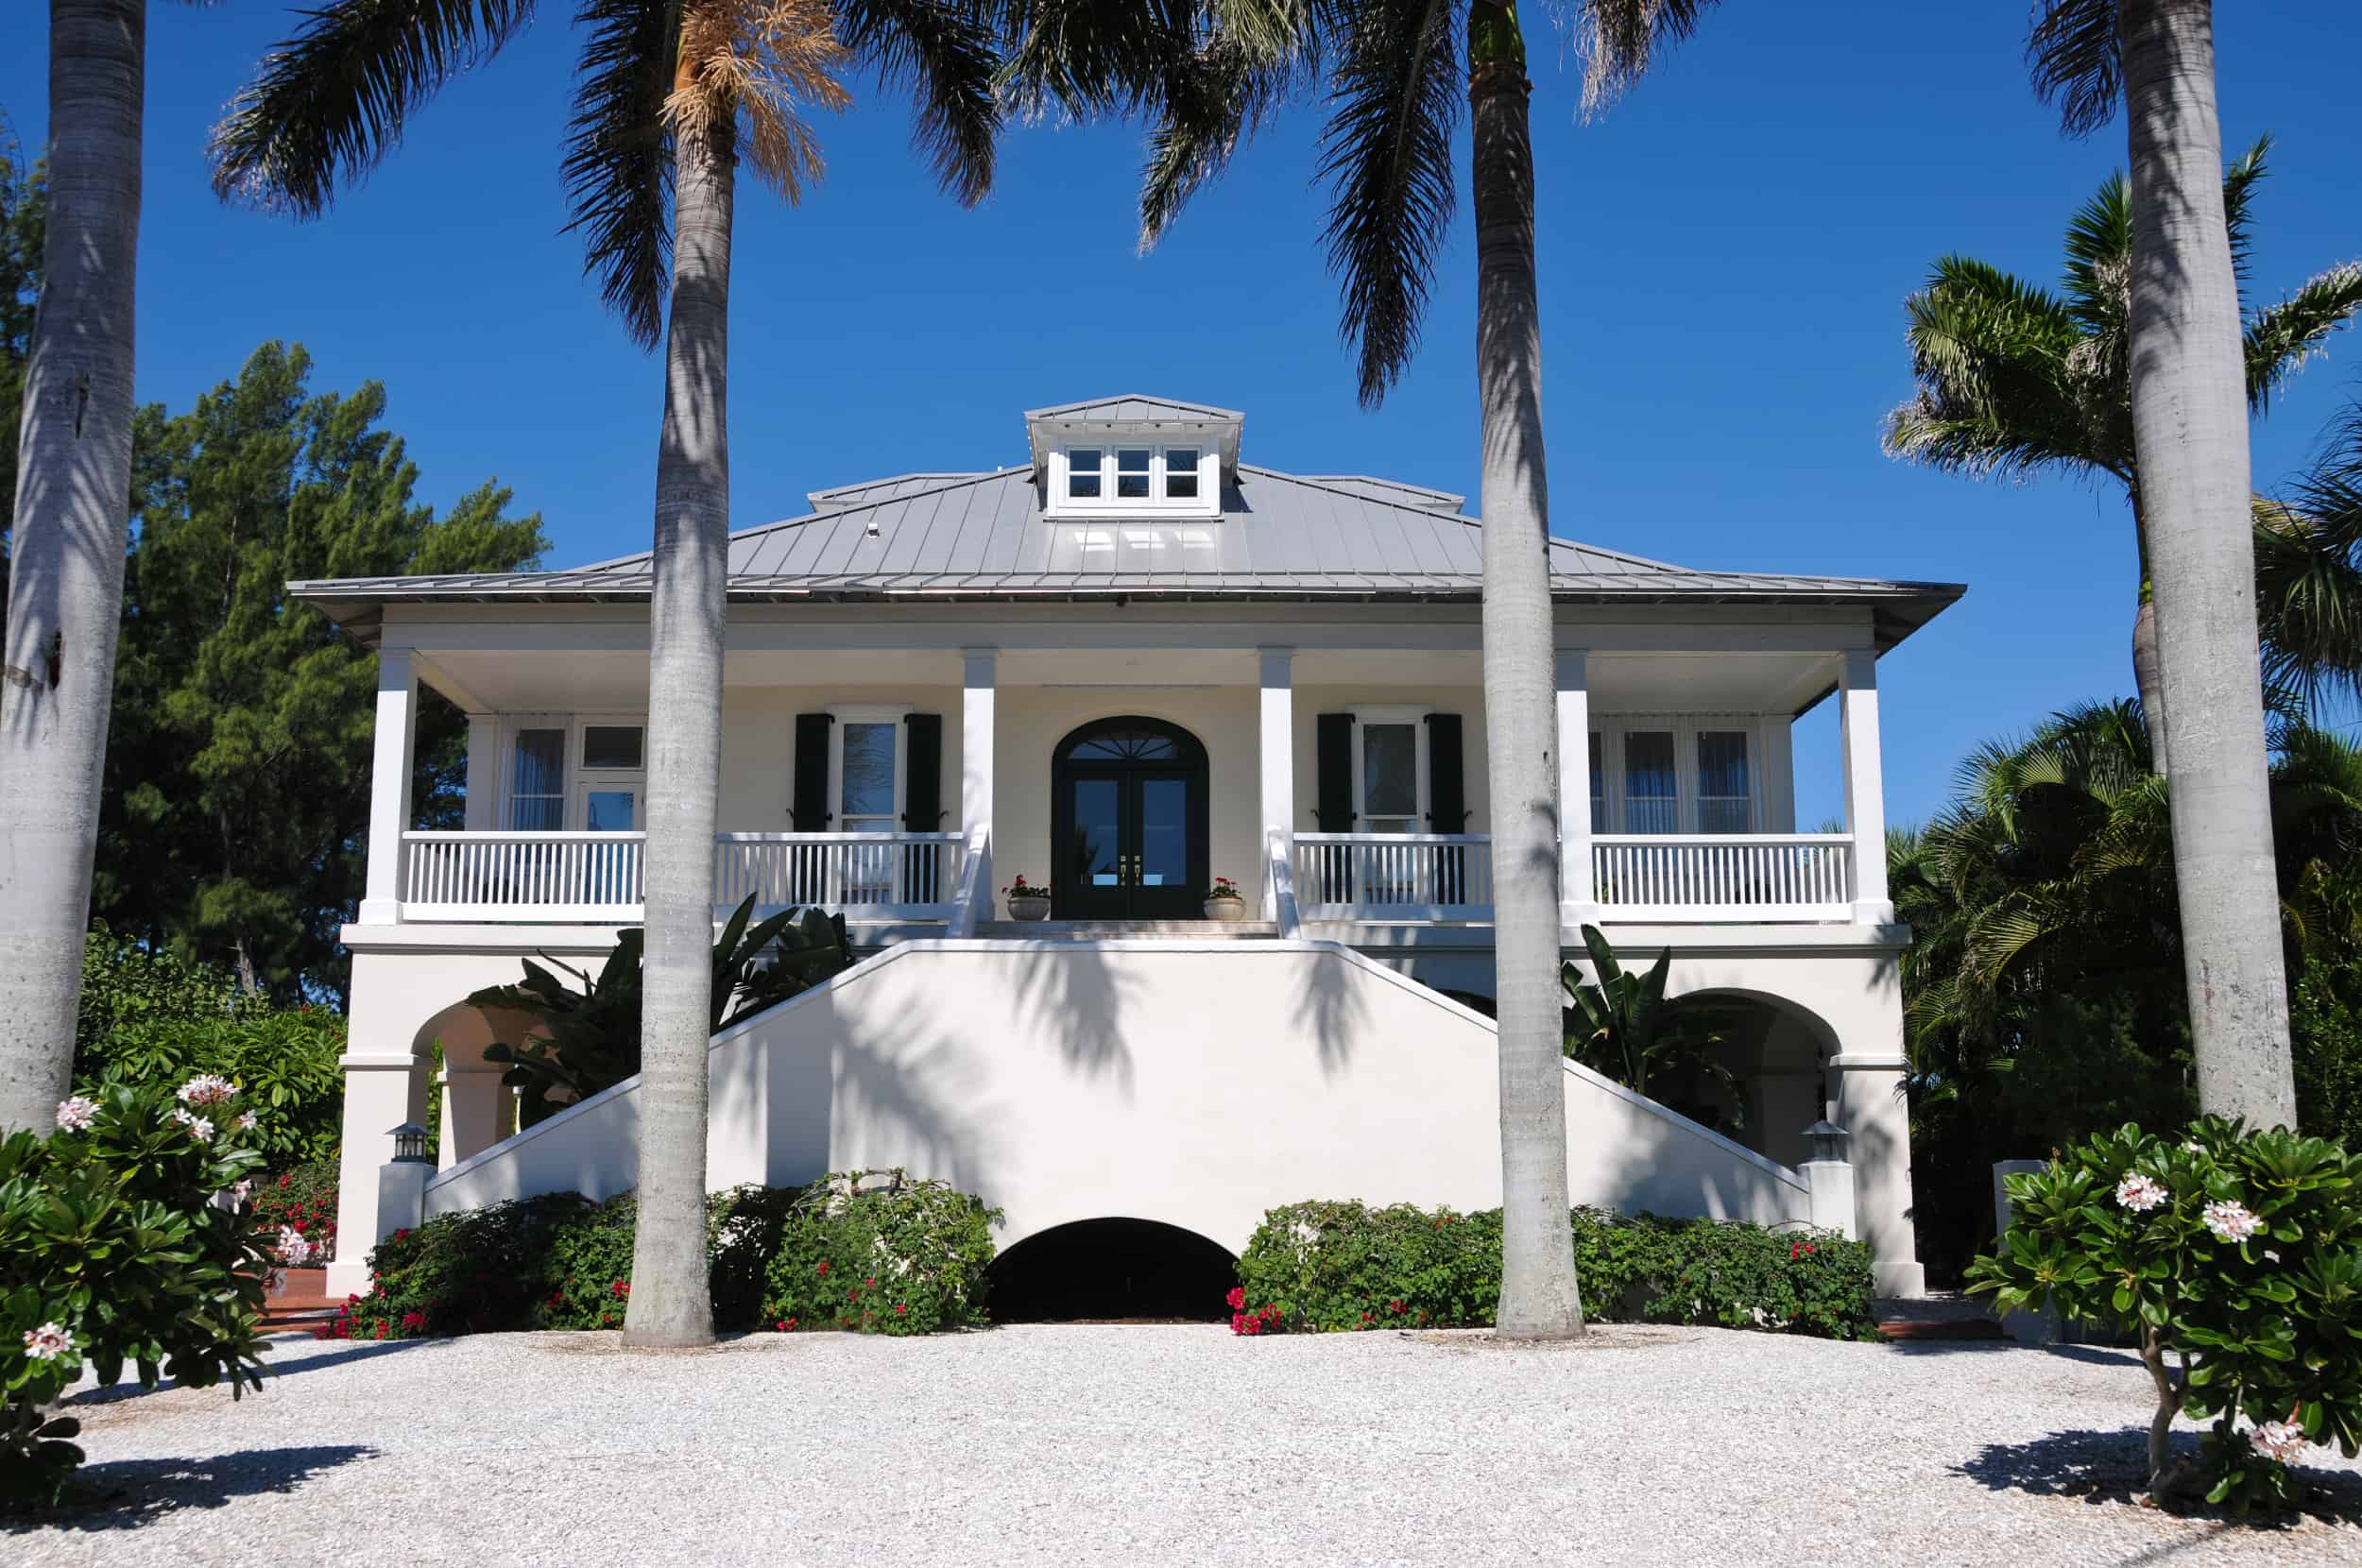 A large white Southern home with columns and palm trees